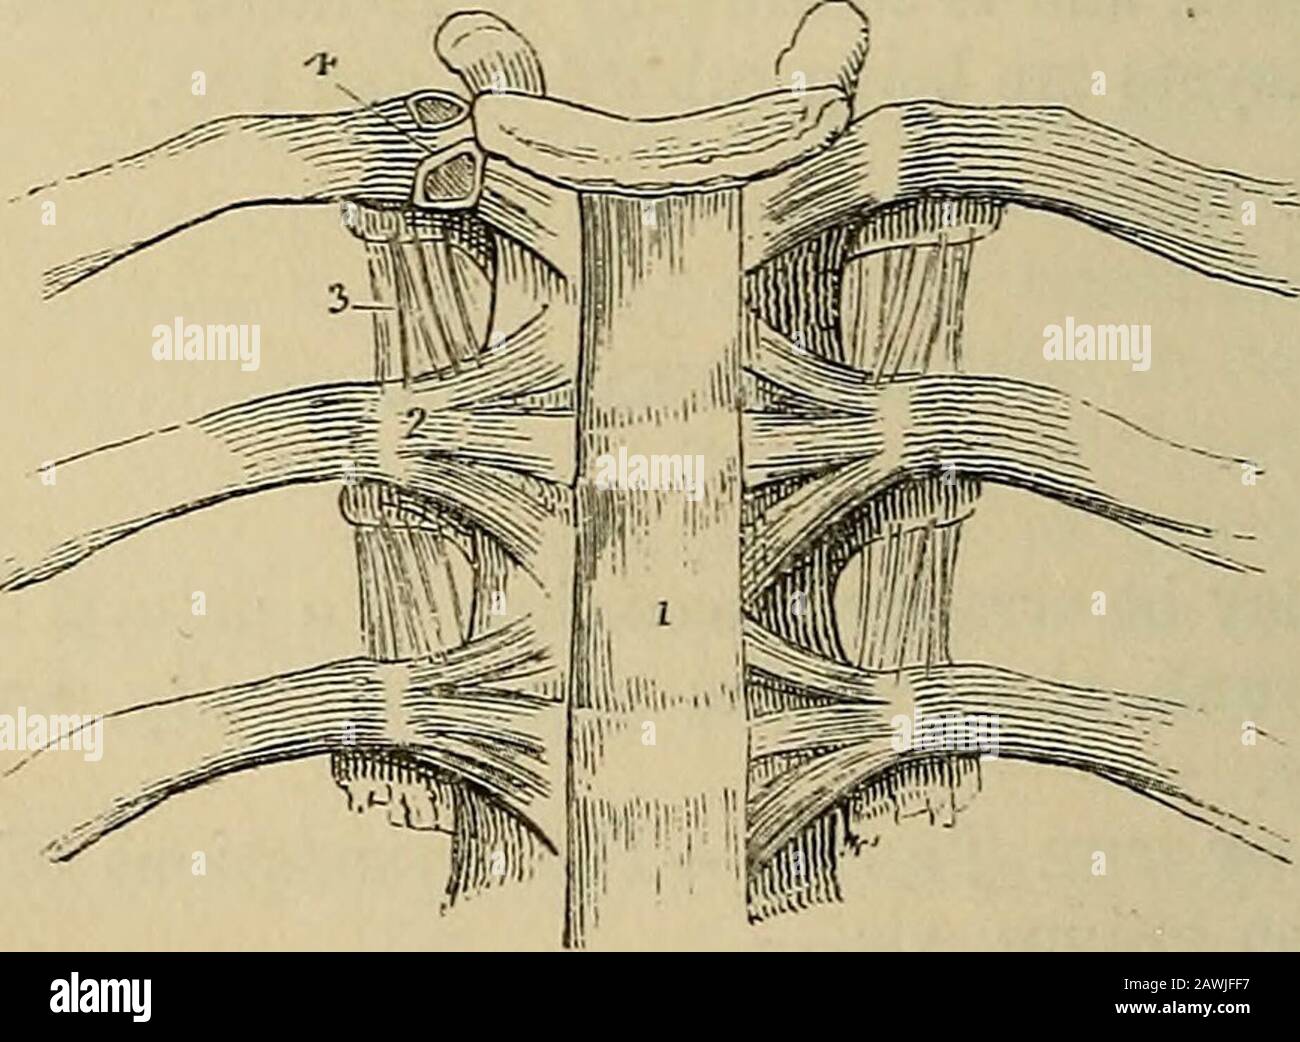 The anatomist's vade mecum : a system of human anatomy . vis. 1. Articulation of the vertehral Column. The ligaments connectingtogether the different pieces of the vertebral column, admit of thesame arrangement as that of the vertebra? themselves. Thus theligaments Of the , are the— Of the arches,— Of the articular processesr Of the spinous processes,— Of the transverse processes. Anterior common ligament,Posterior common ligament,Intervertebral substance.Ligamenta subflava.Capsular ligaments.Synovial membranes.Inter-spinous,Supra-spiuous.Inter-transverse. Bodies.—The Anterior common ligament Stock Photo